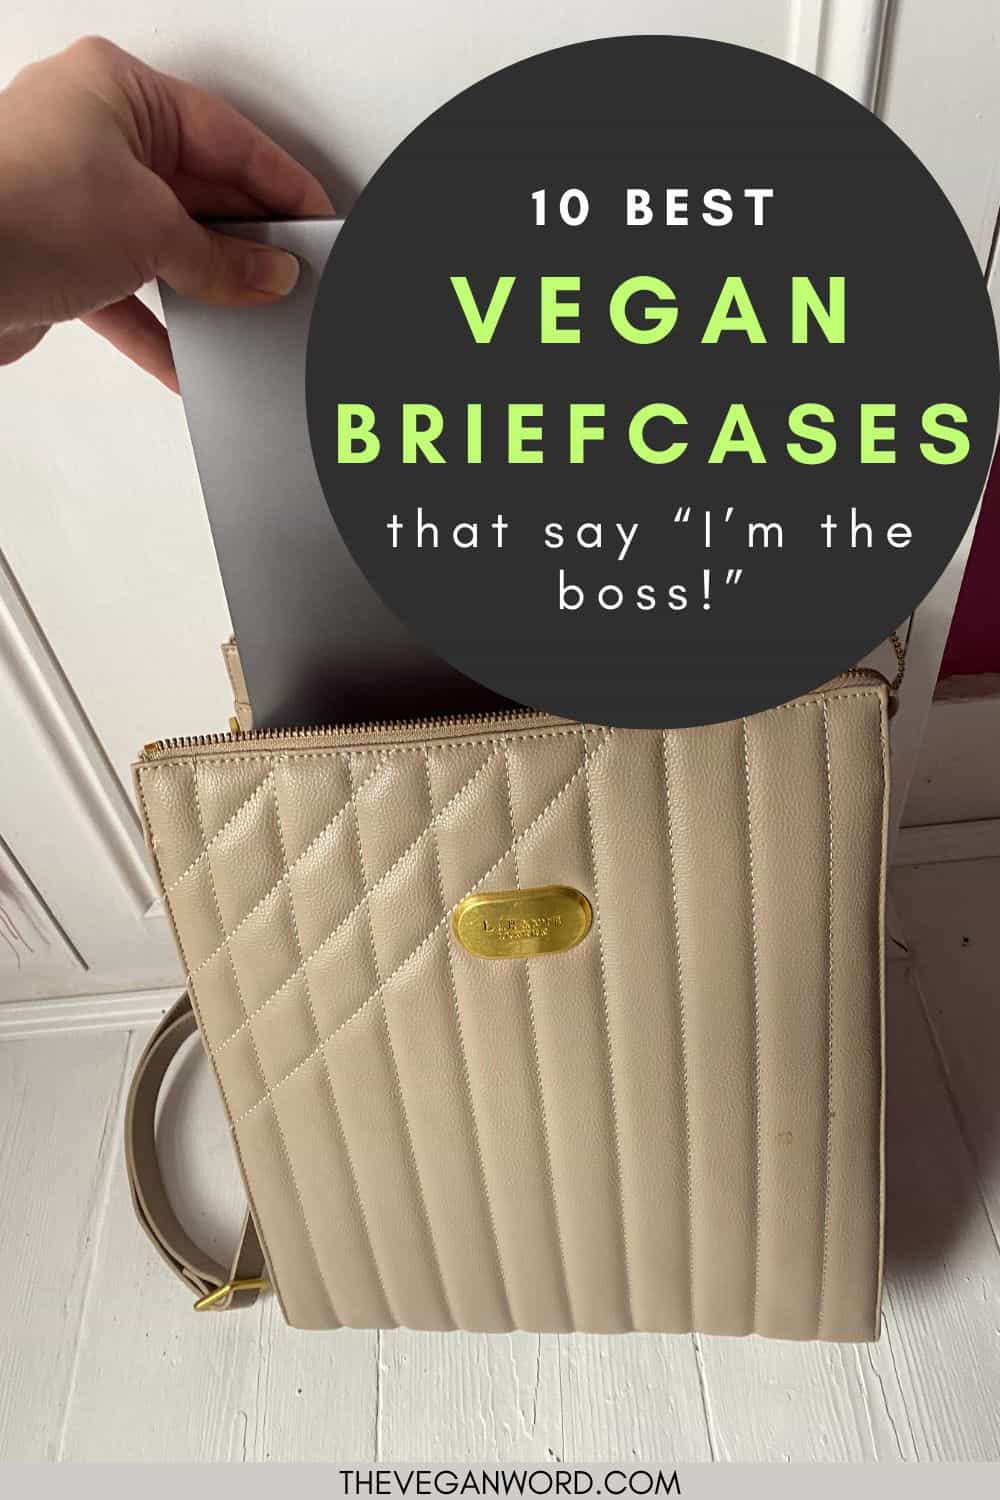 Pinterest image showing Macbook being pulled out of a briefcase with text that reads "10 best vegan briefcases that will say 'I'm the boss!'"